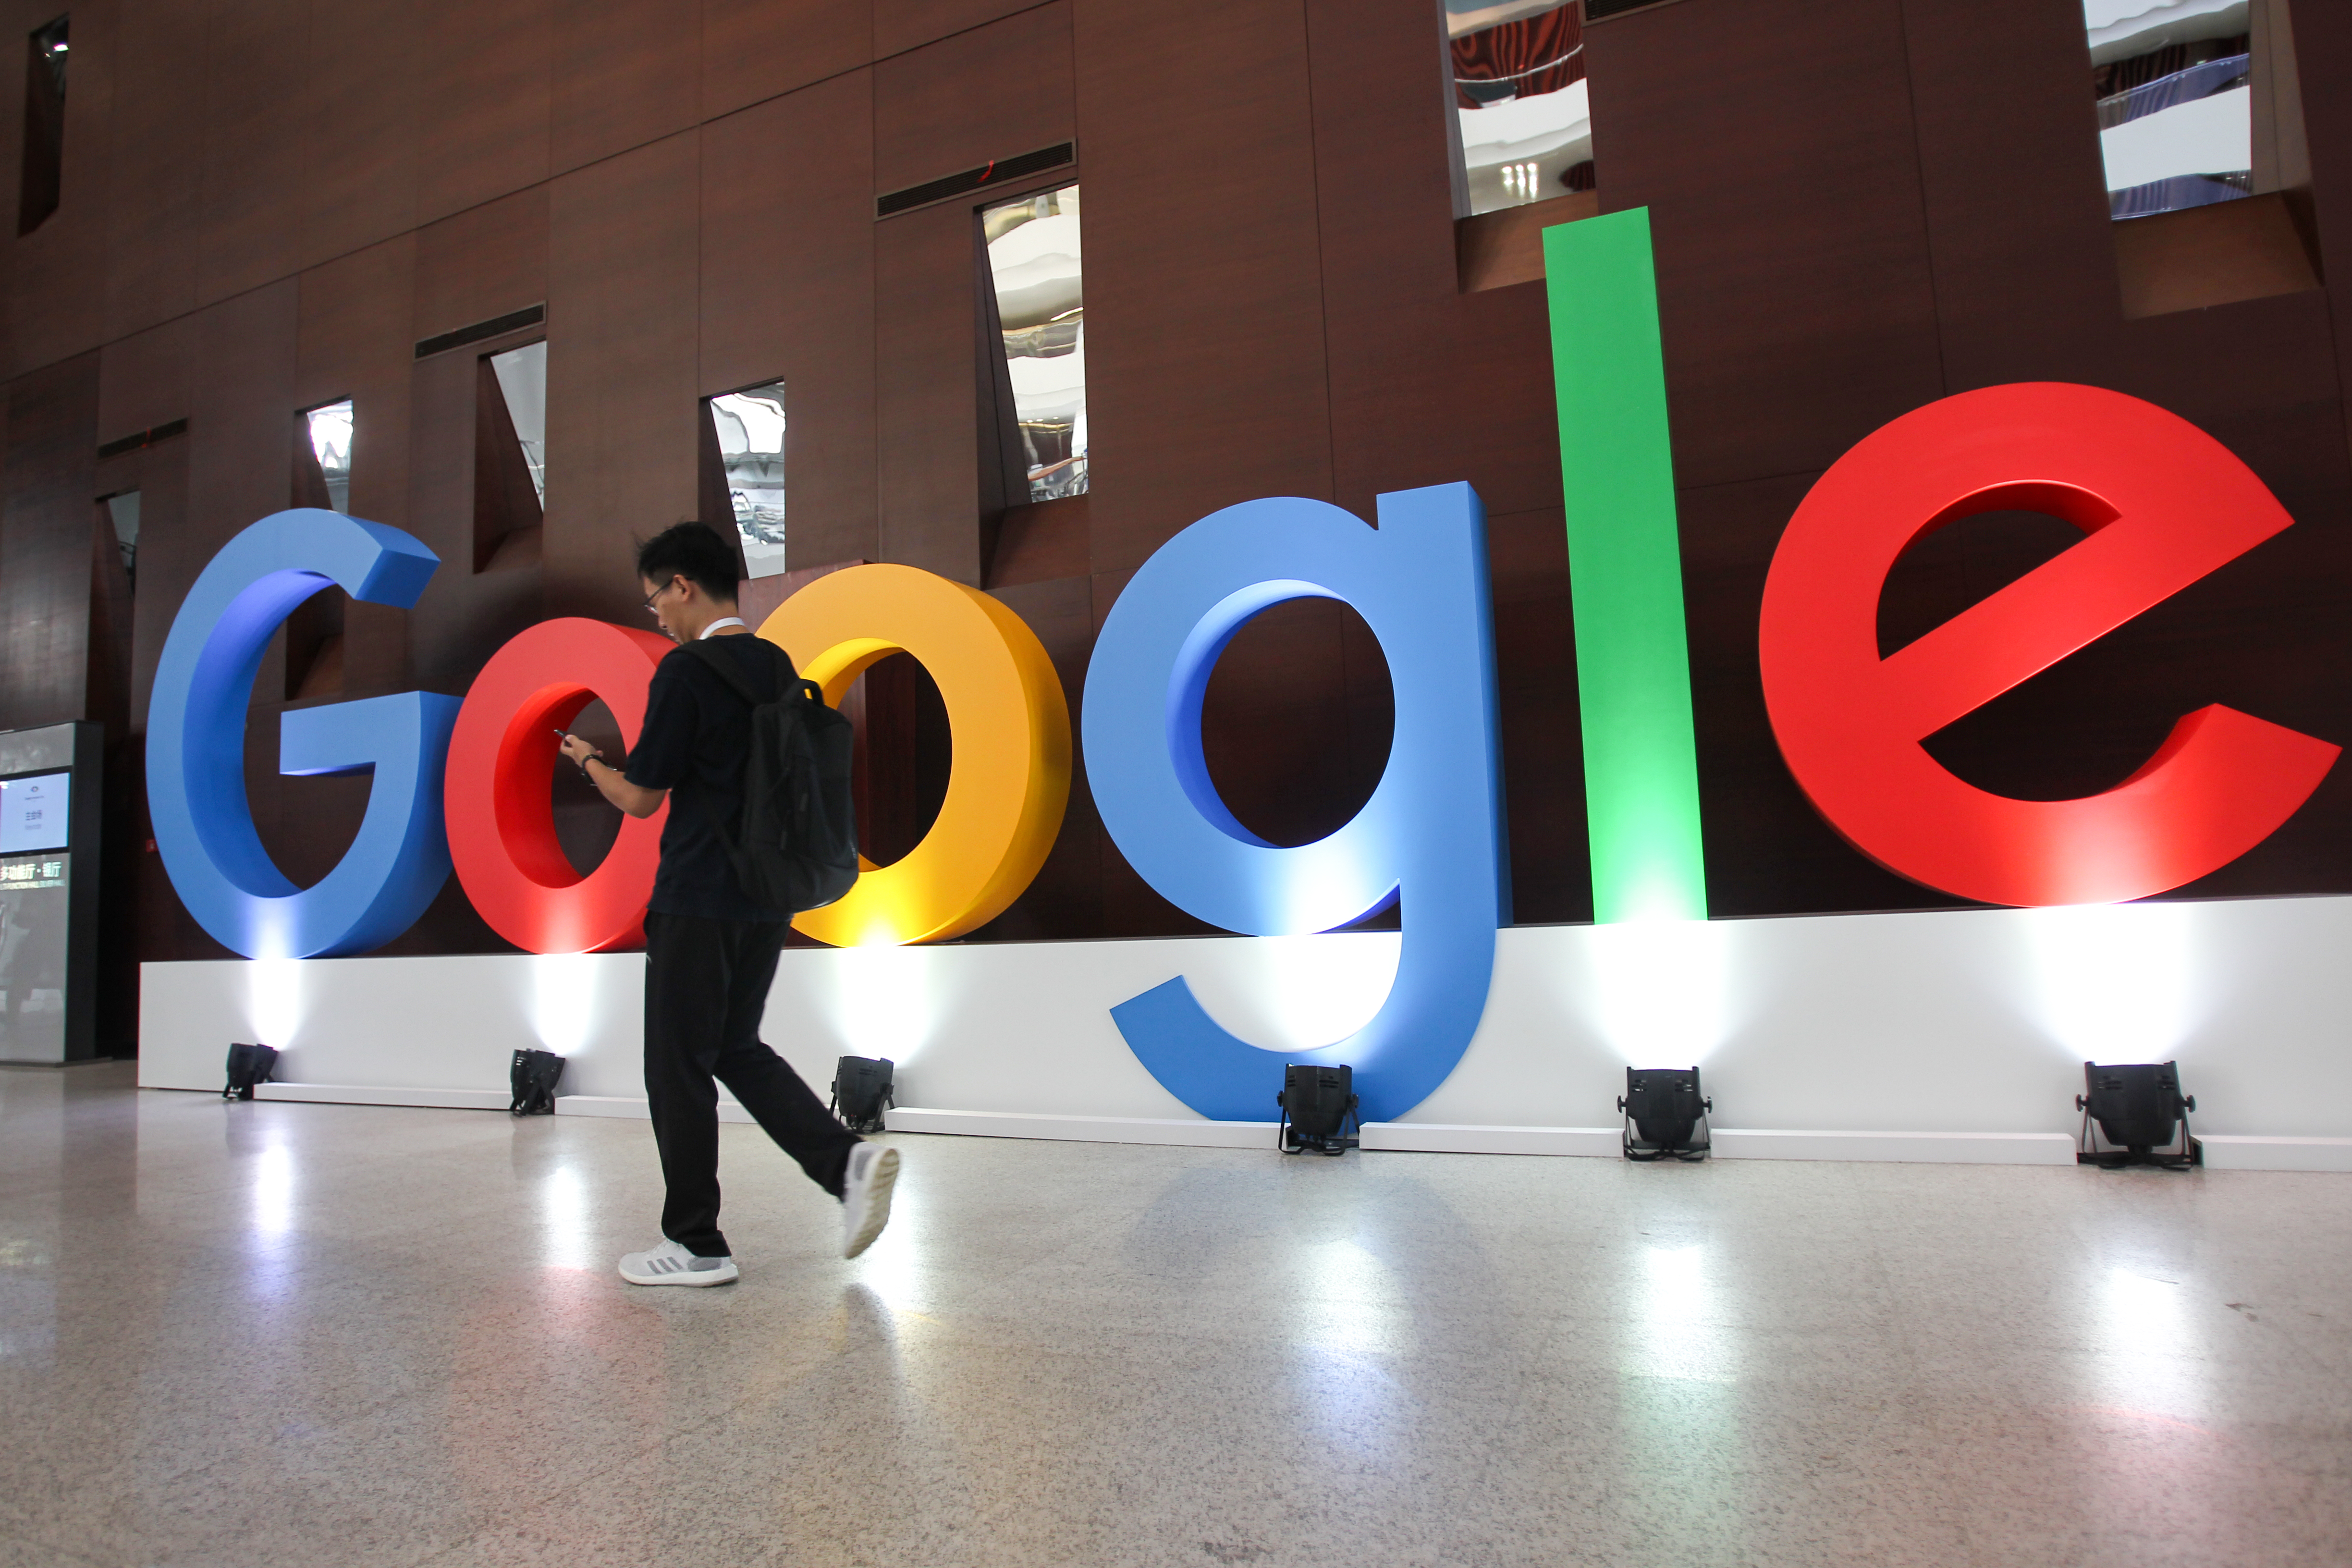 google playstore: Google to offer more visibility to apps on Play Store,  tech giant working on listing layout - The Economic Times